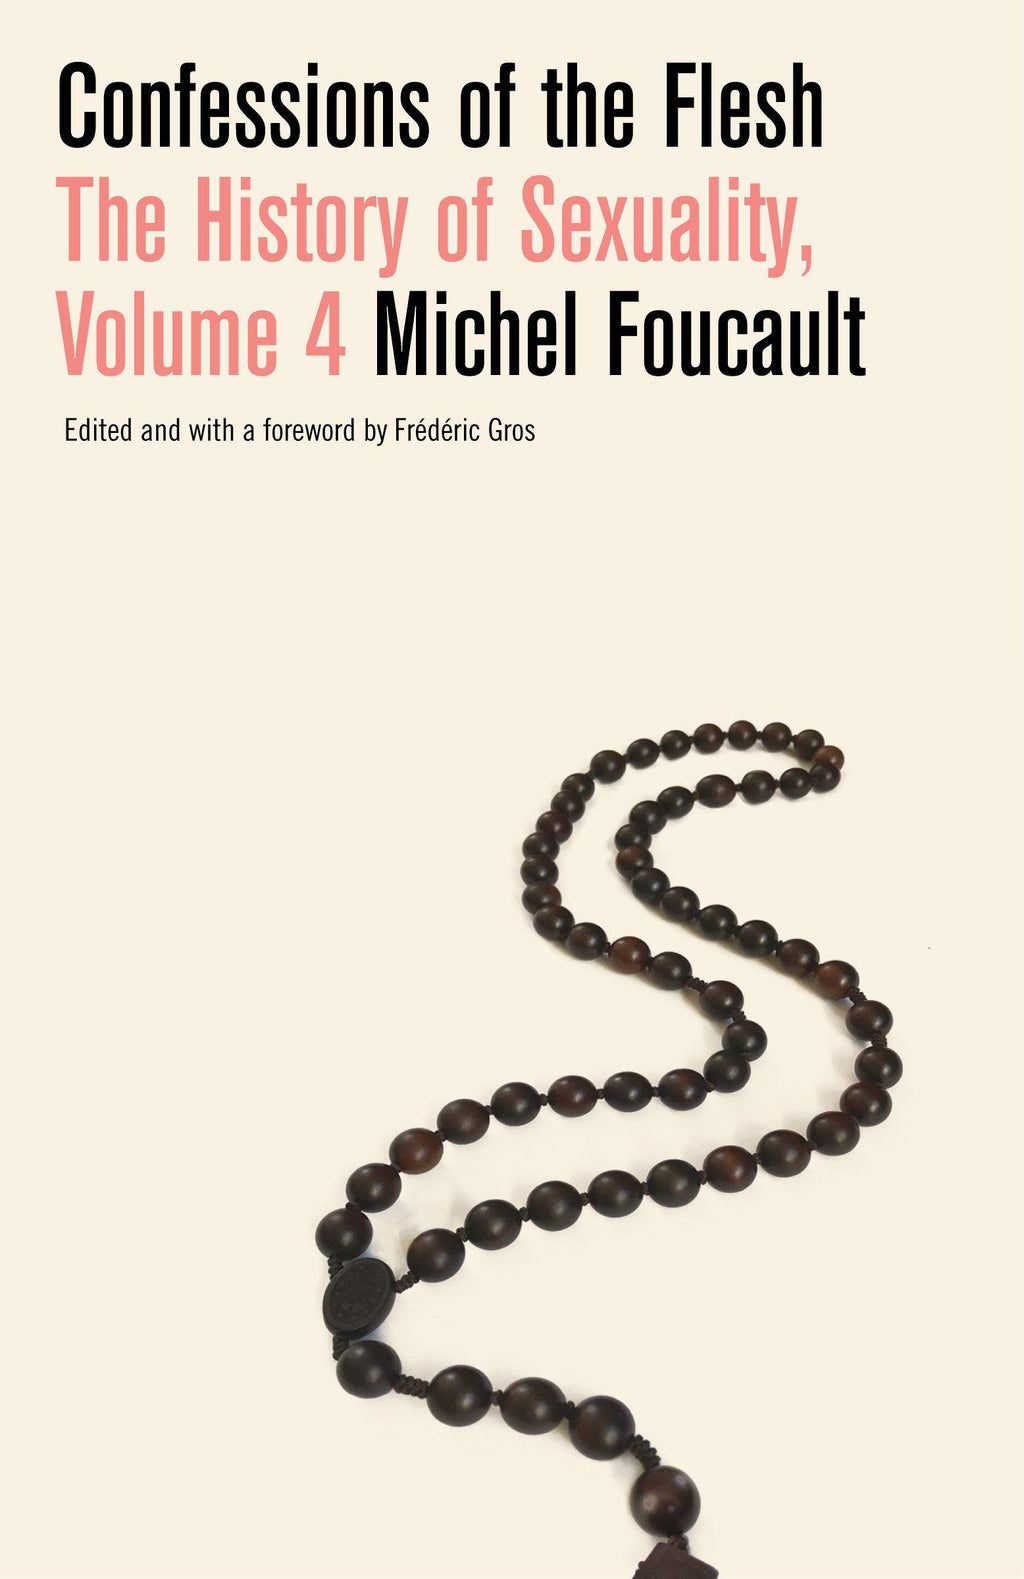 Confessions of the Flesh: The History of Sexuality by Michel Foucault